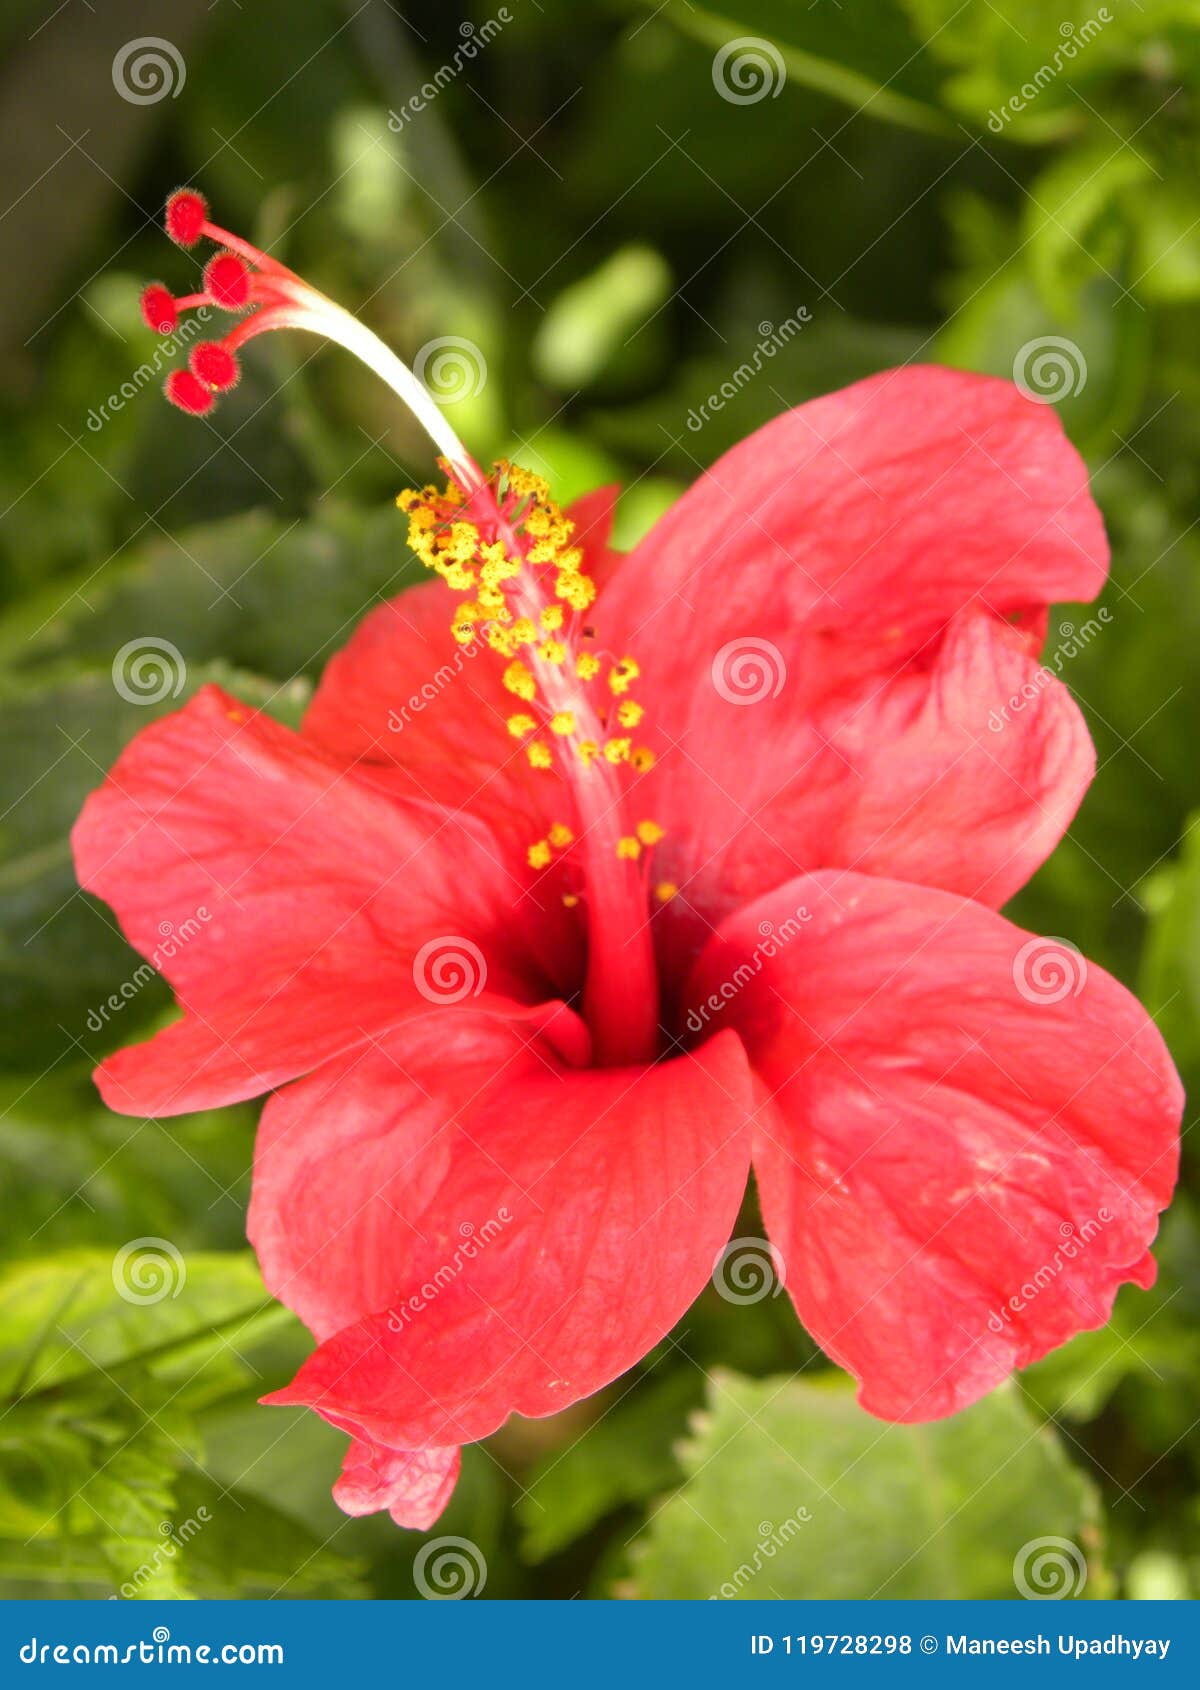 Red Color Hibiscus Flower With Pistil And Stamen Stock Photo Image Of Floral Colors 119728298